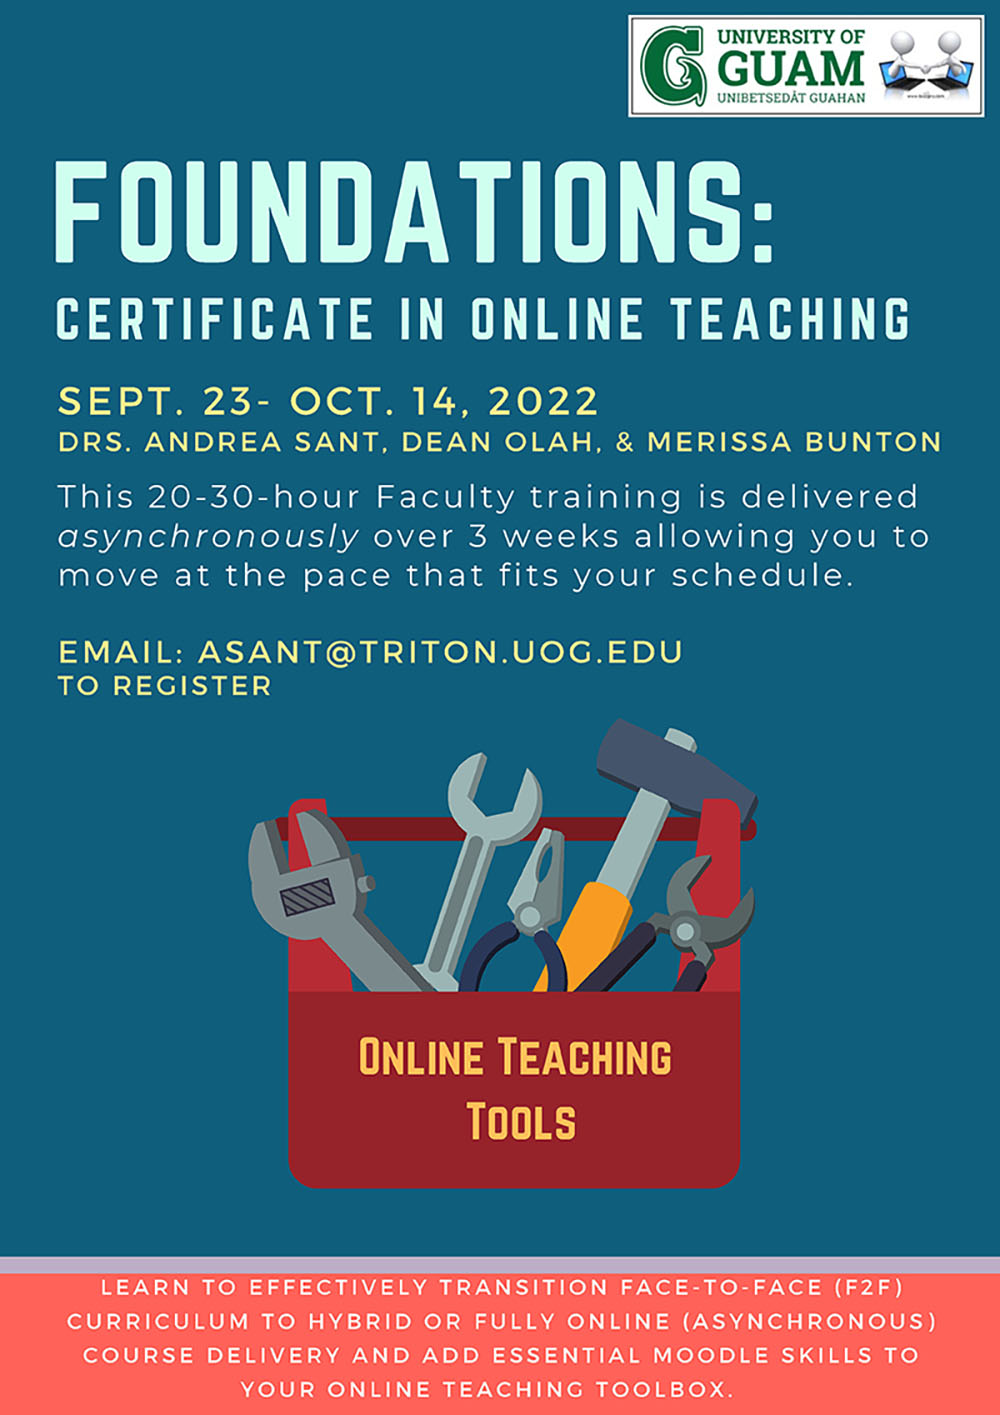 Faculty Training: Foundations - Certificate in Online Teaching